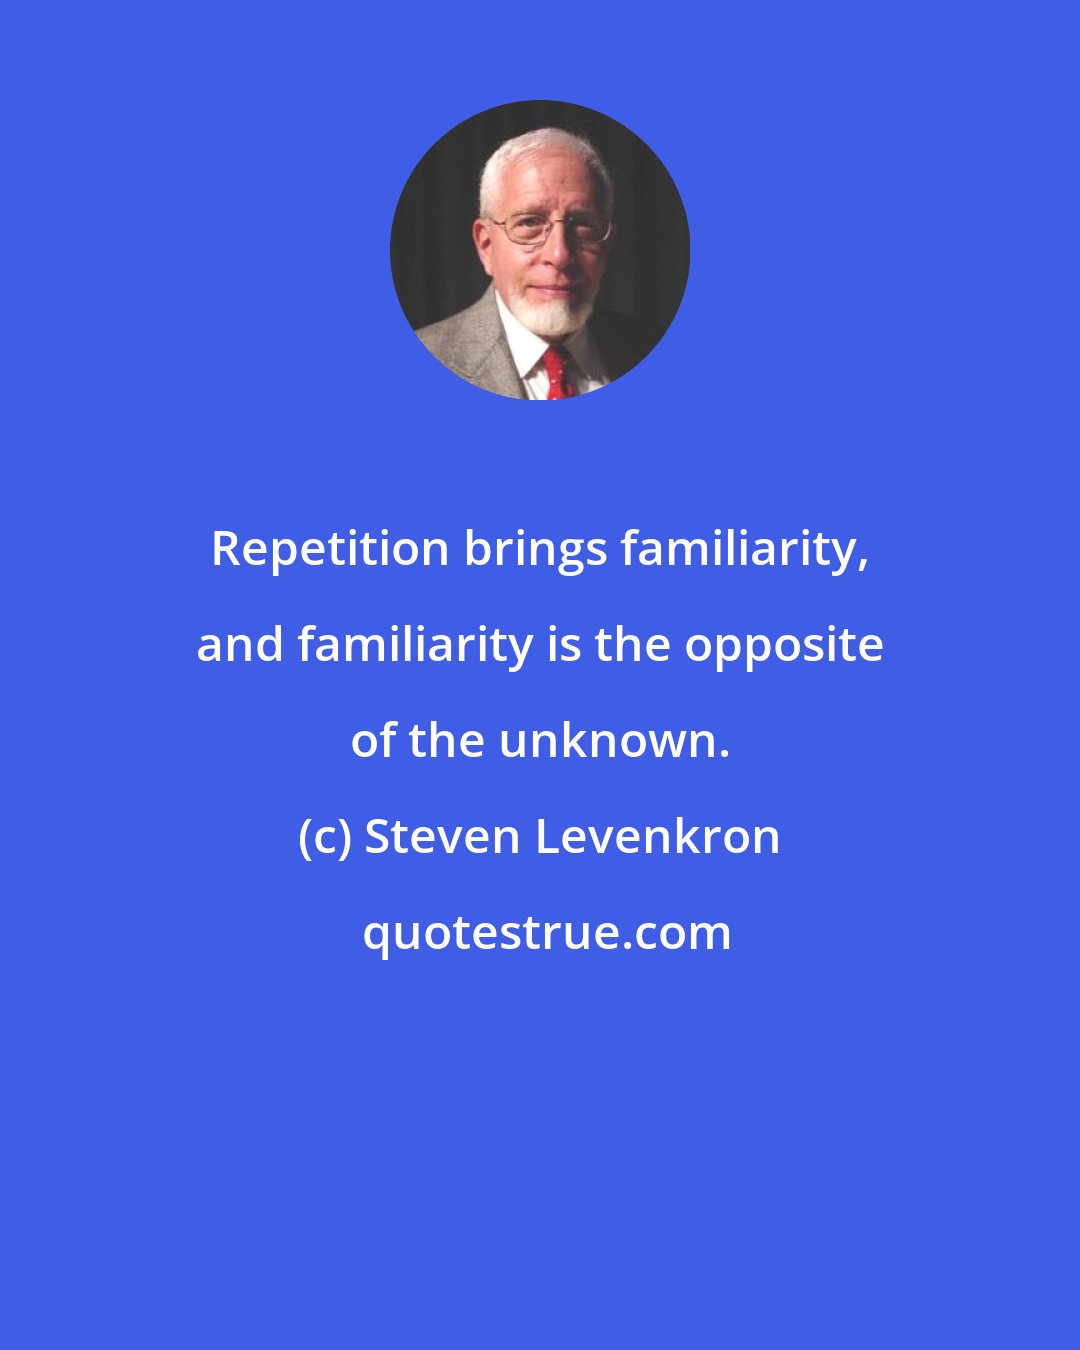 Steven Levenkron: Repetition brings familiarity, and familiarity is the opposite of the unknown.